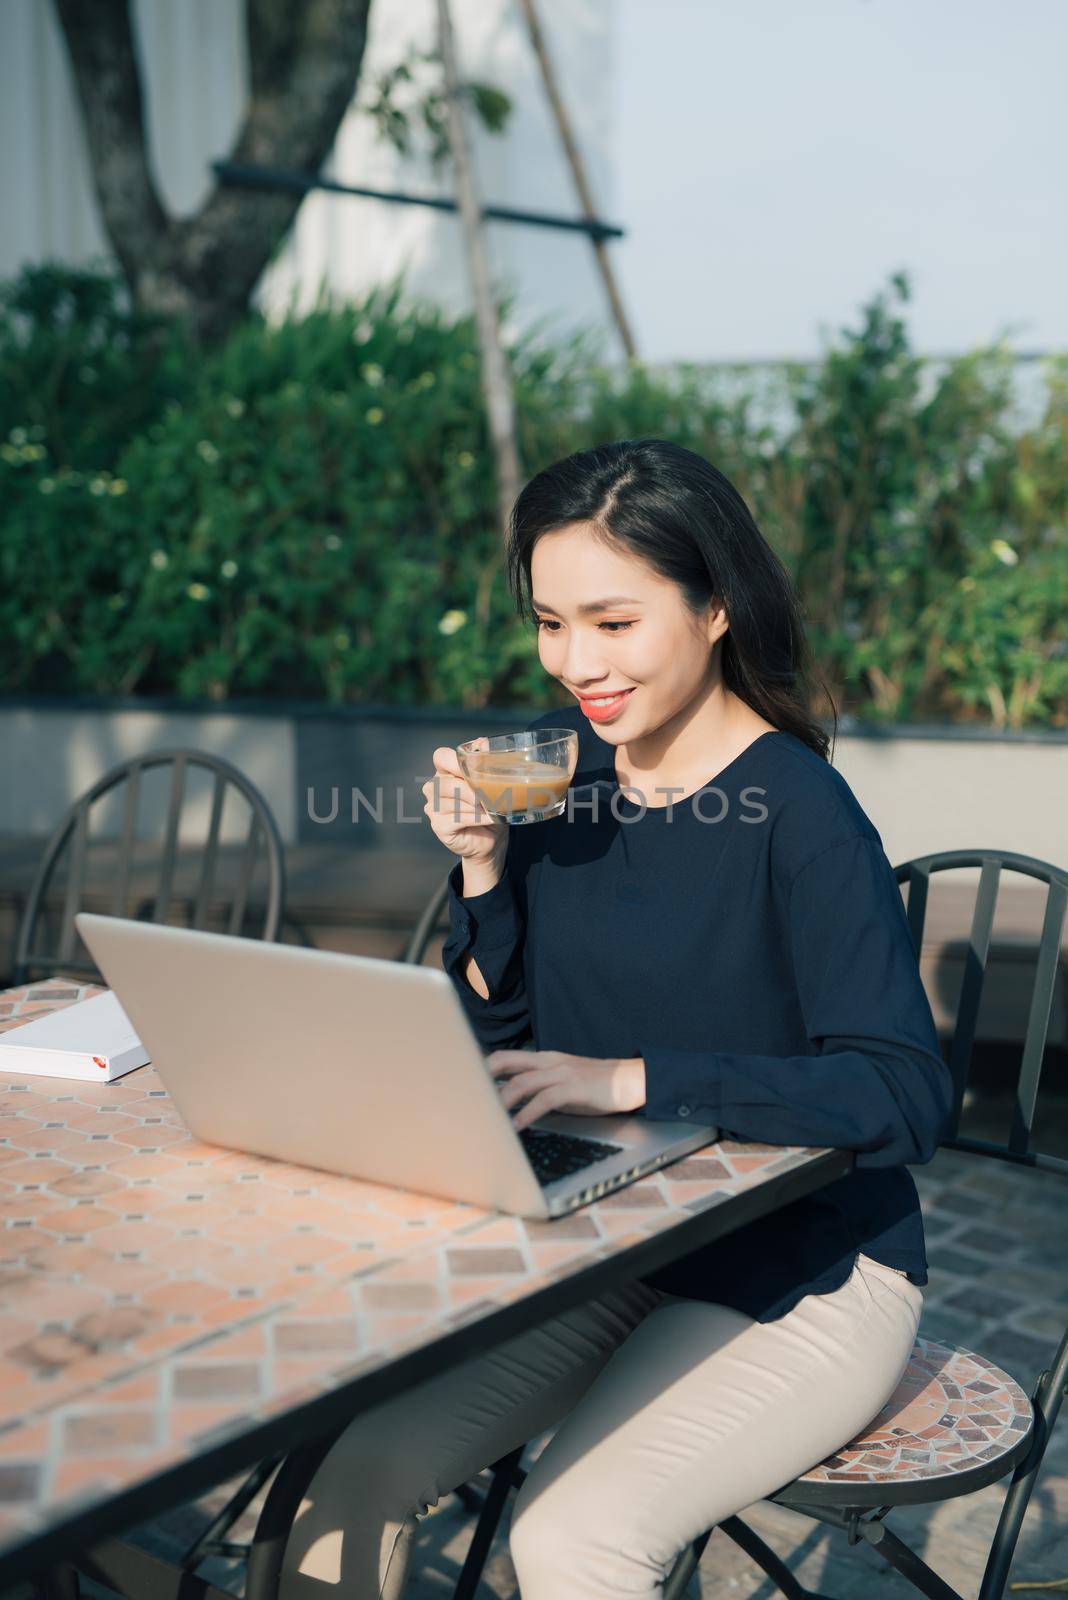 Taking advantages of free Wi-Fi. Beautiful young woman working on laptop and smiling while sitting outdoors by makidotvn